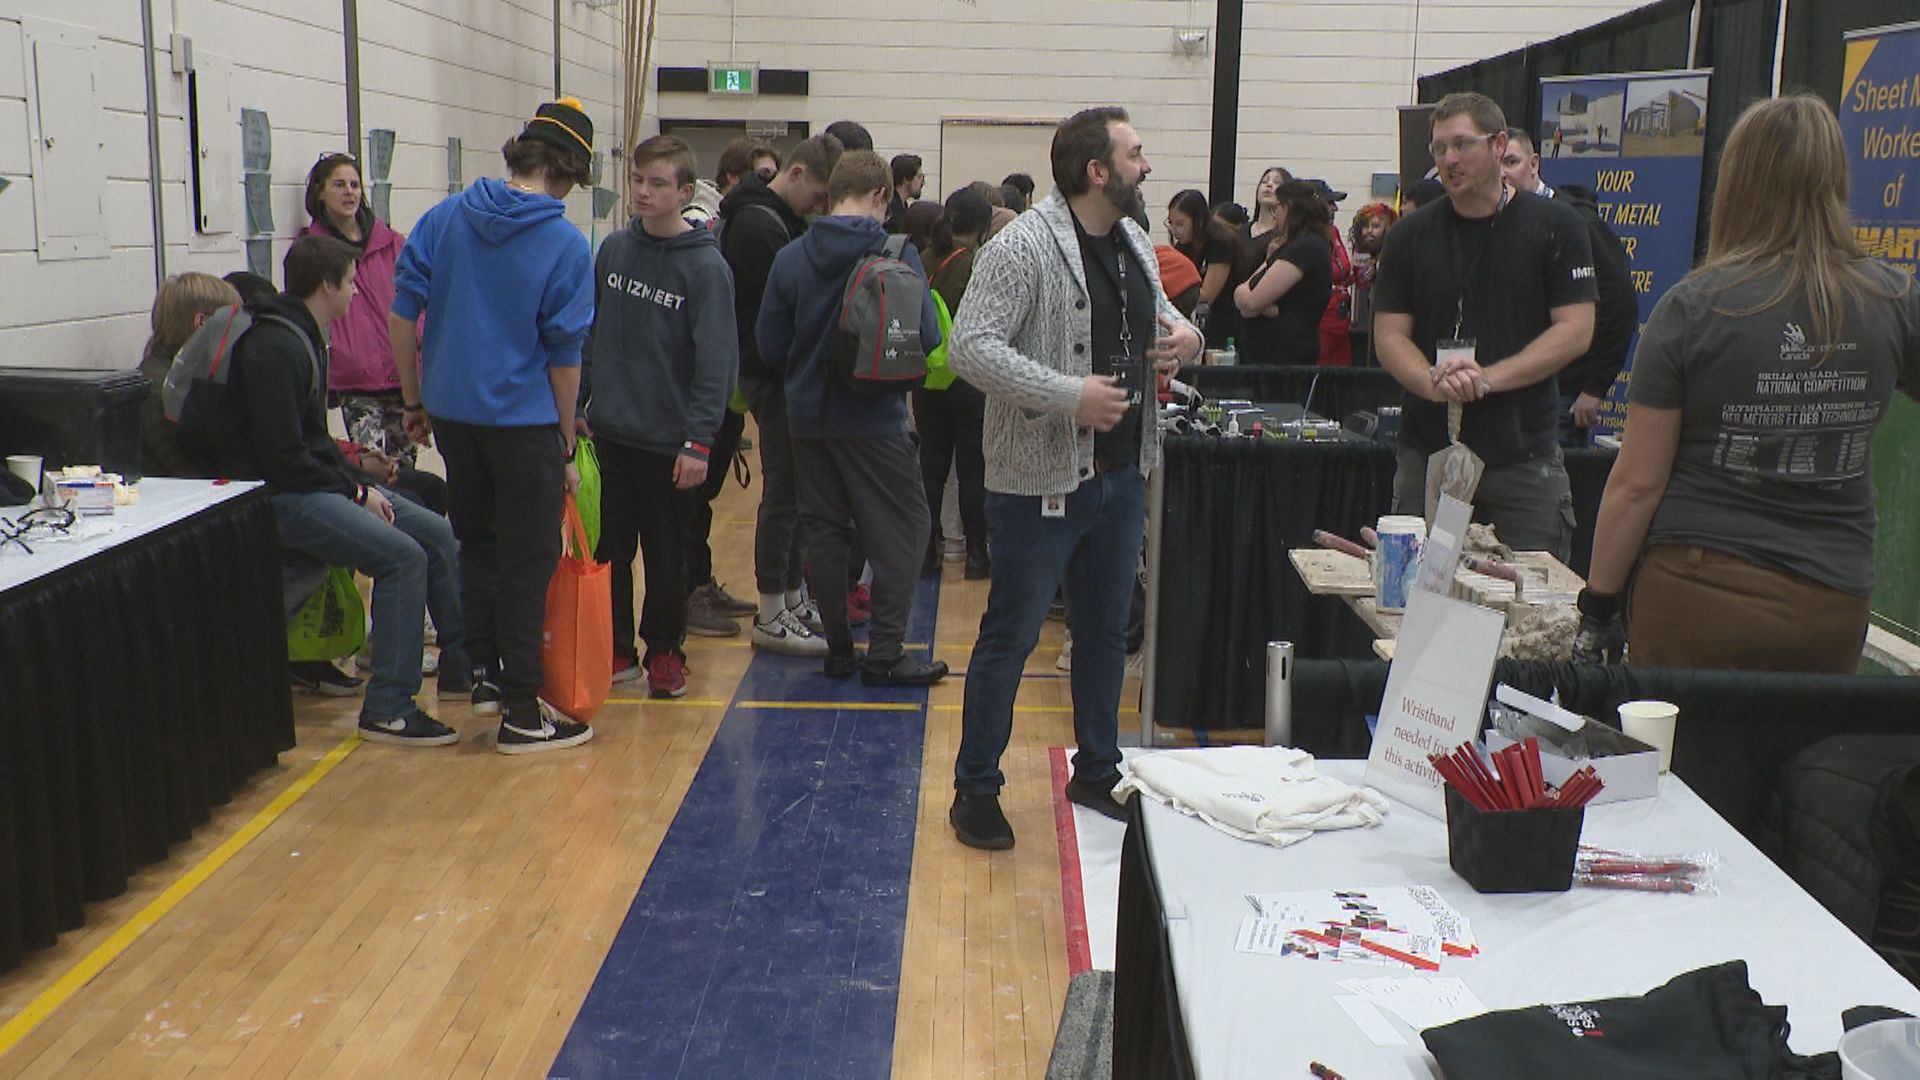 Try-a-trade and technology career fair kicks off in Regina